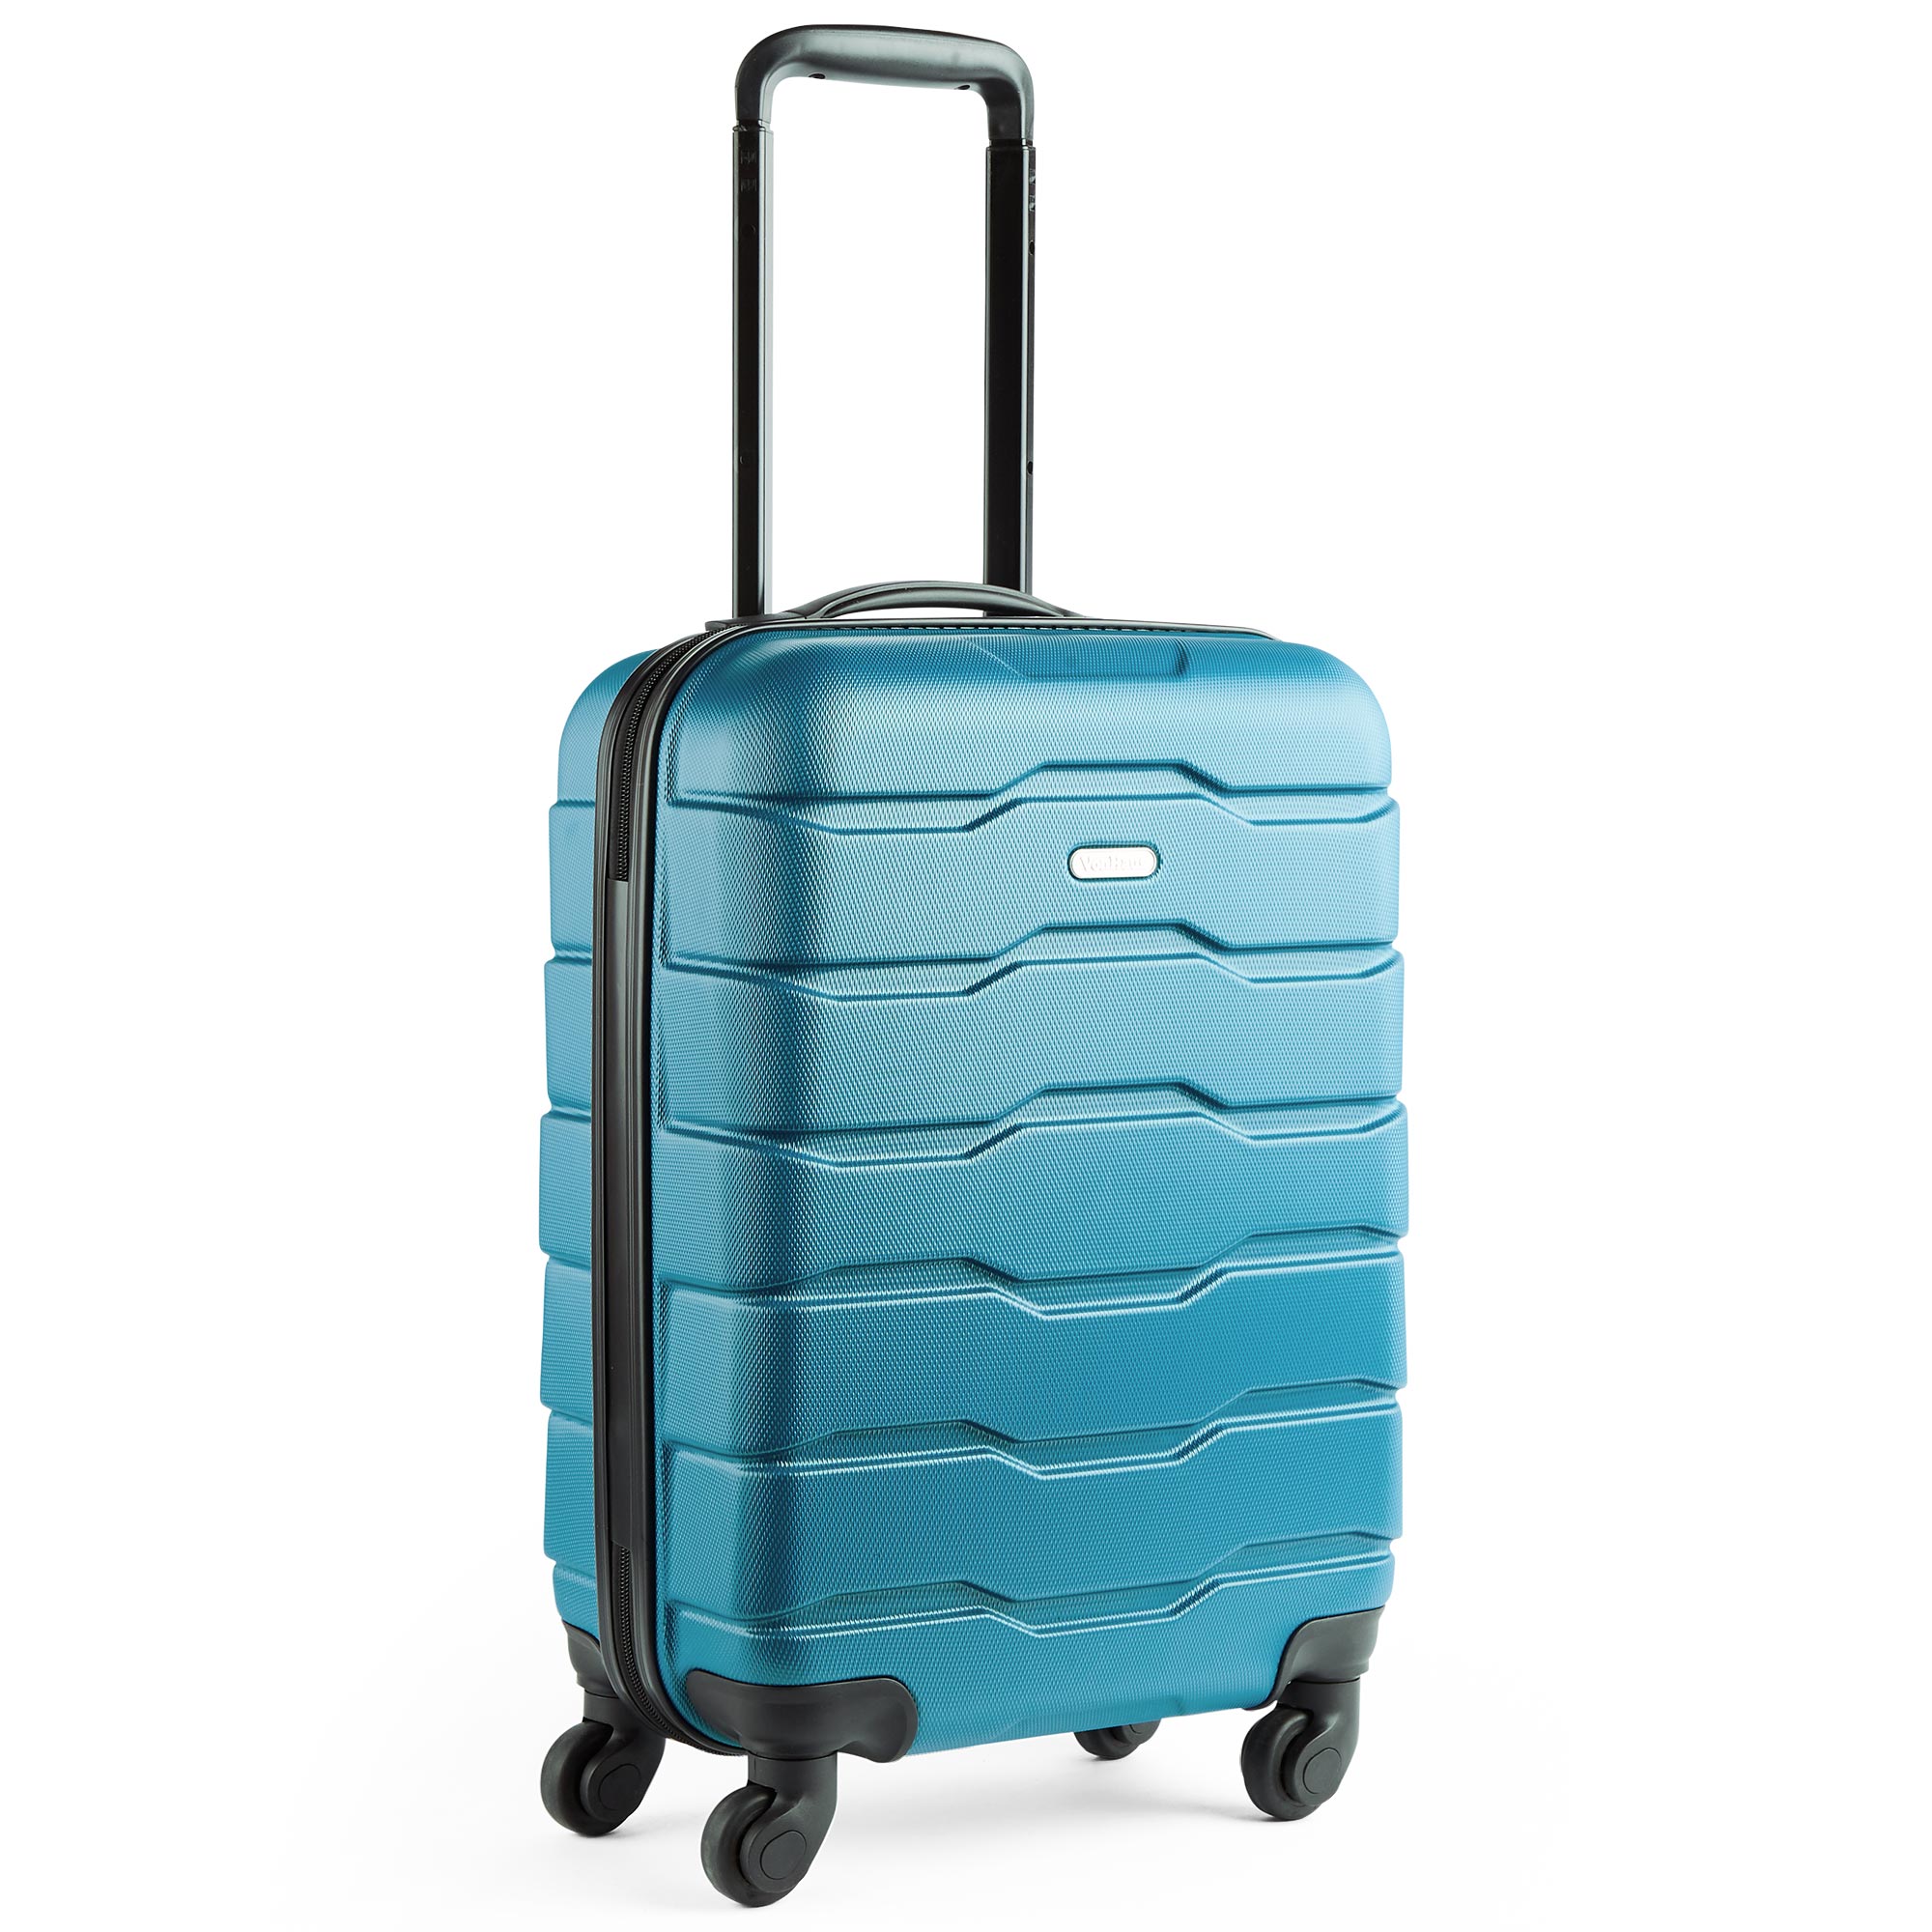 VonHaus ABS Teal Cabin Bag Hard Shell Carry on Hand Luggage Suitcase with Integrated Lock